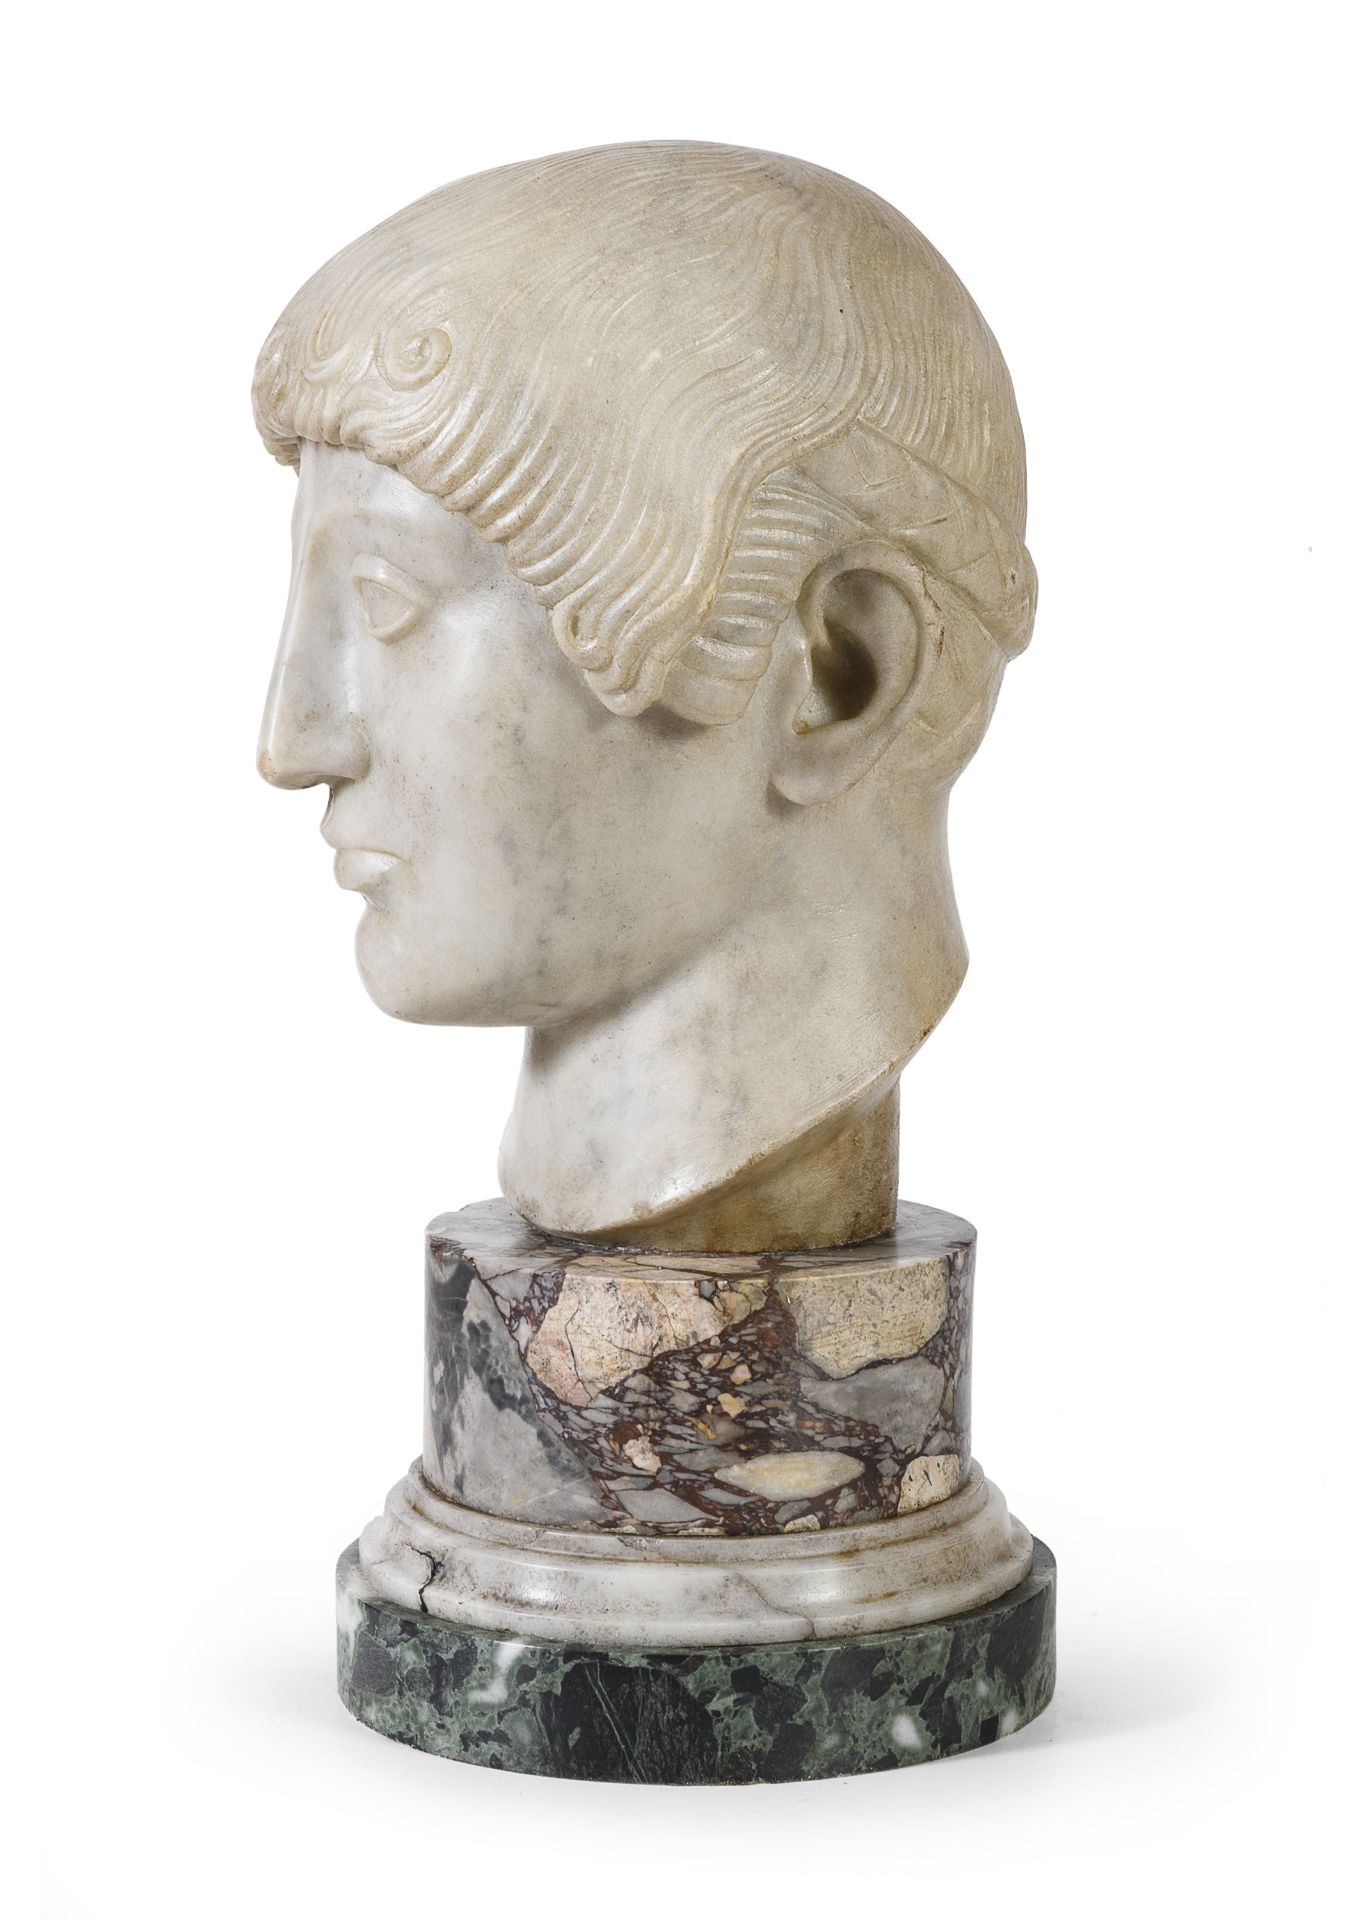 HEAD OF ADONES IN WHITE MARBLE EARLY 19TH CENTURY - Image 2 of 2